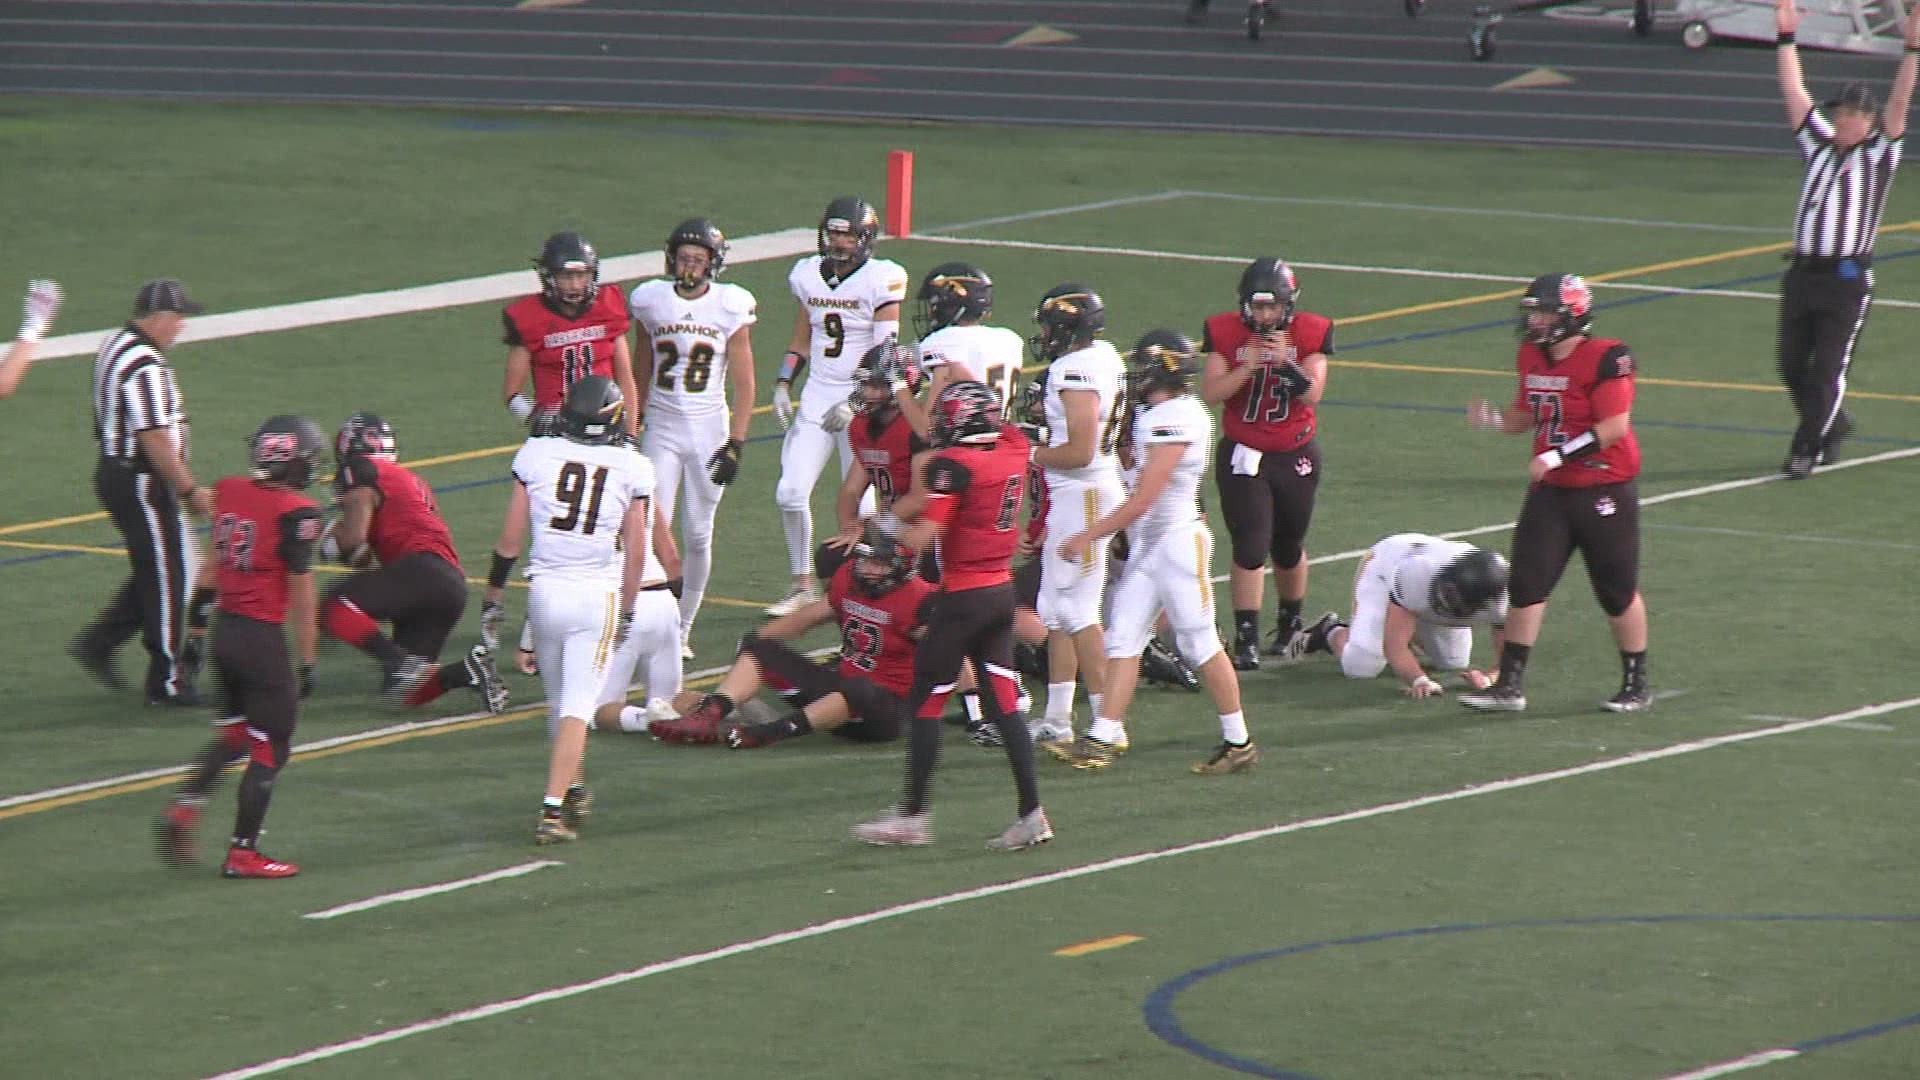 The Sabercats built a 23-0 lead early before the Warriors fought back to make it interesting.